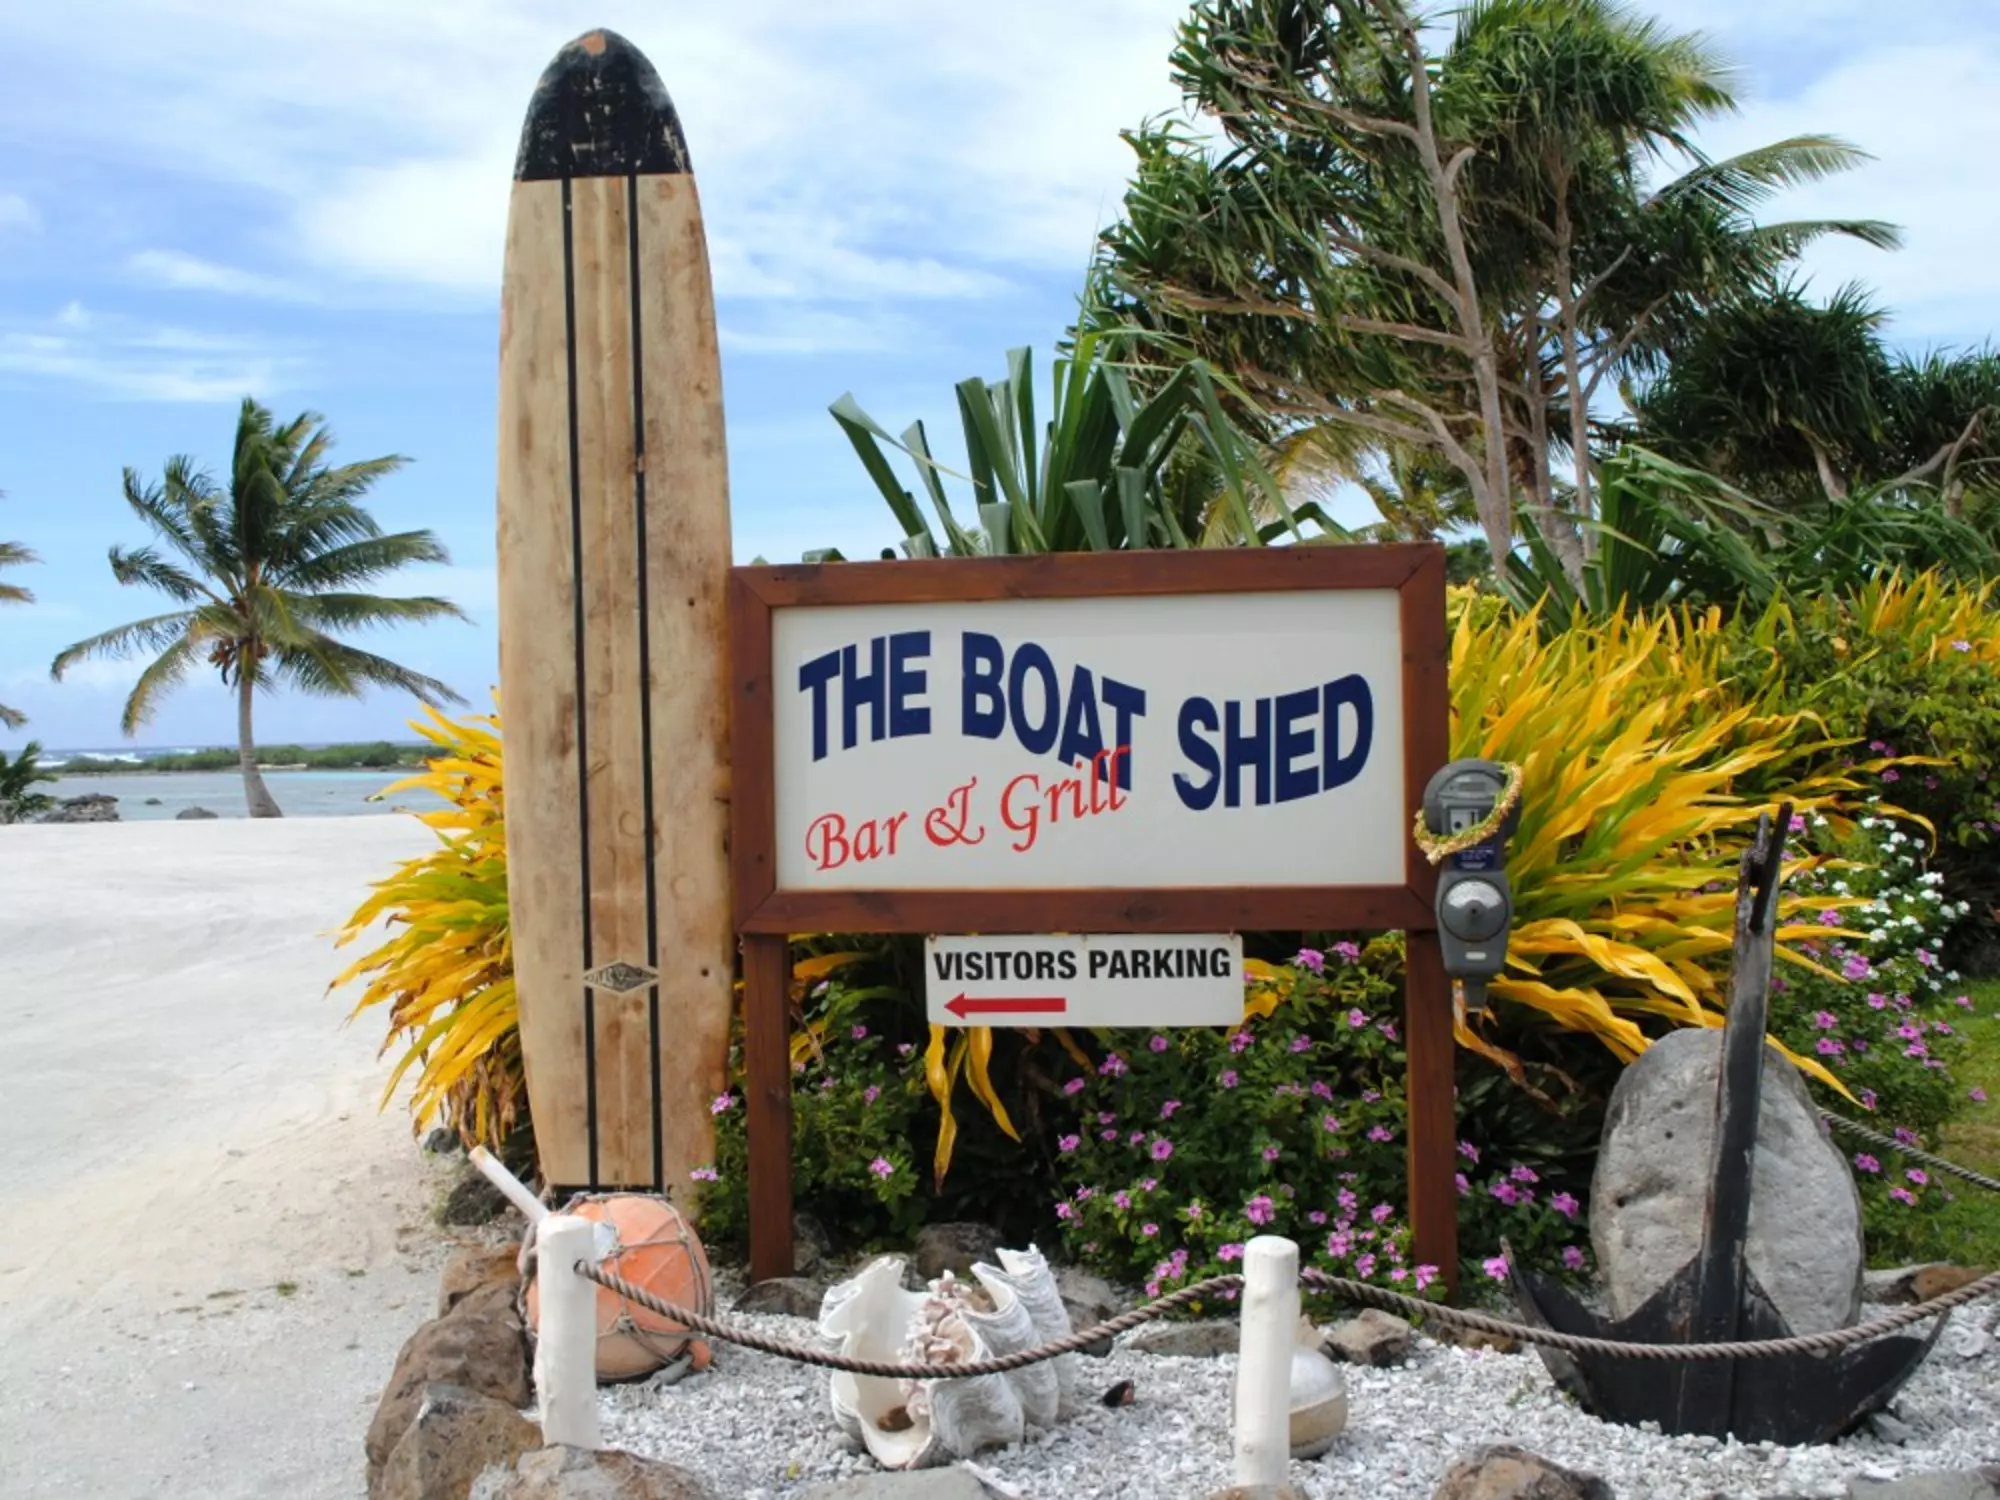 Dine at The Boat Shed Bar & Grill in Aitutaki